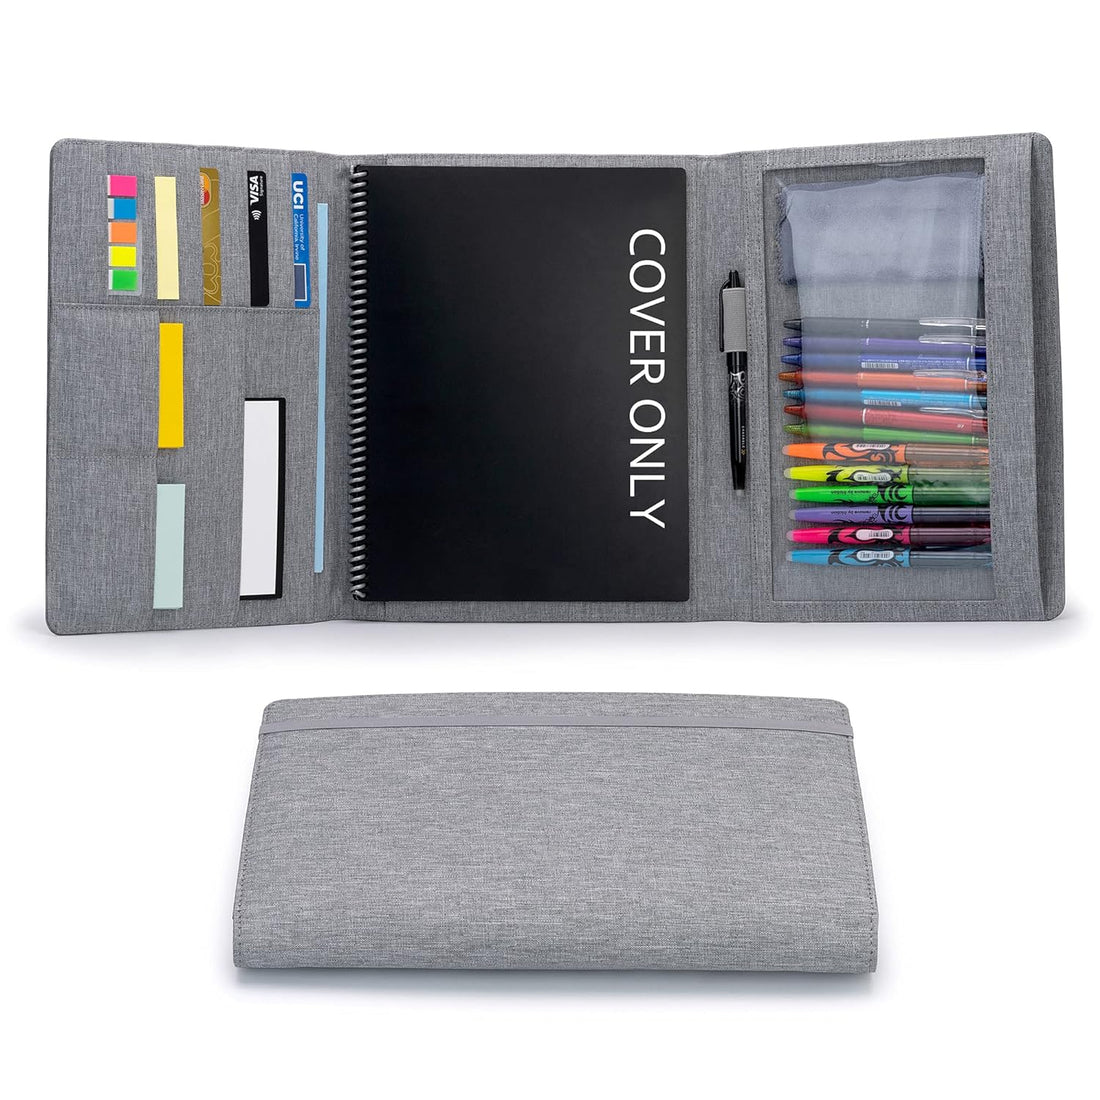 Folio Cover for Rocketbook Everlast Fusion - Letter Size, Waterproof Fabric, Multi Organizer with Pen Loop, Zipper Pocket, Business Card Holder, fits A4 size Notebook, 11 x 9 inch, Gray